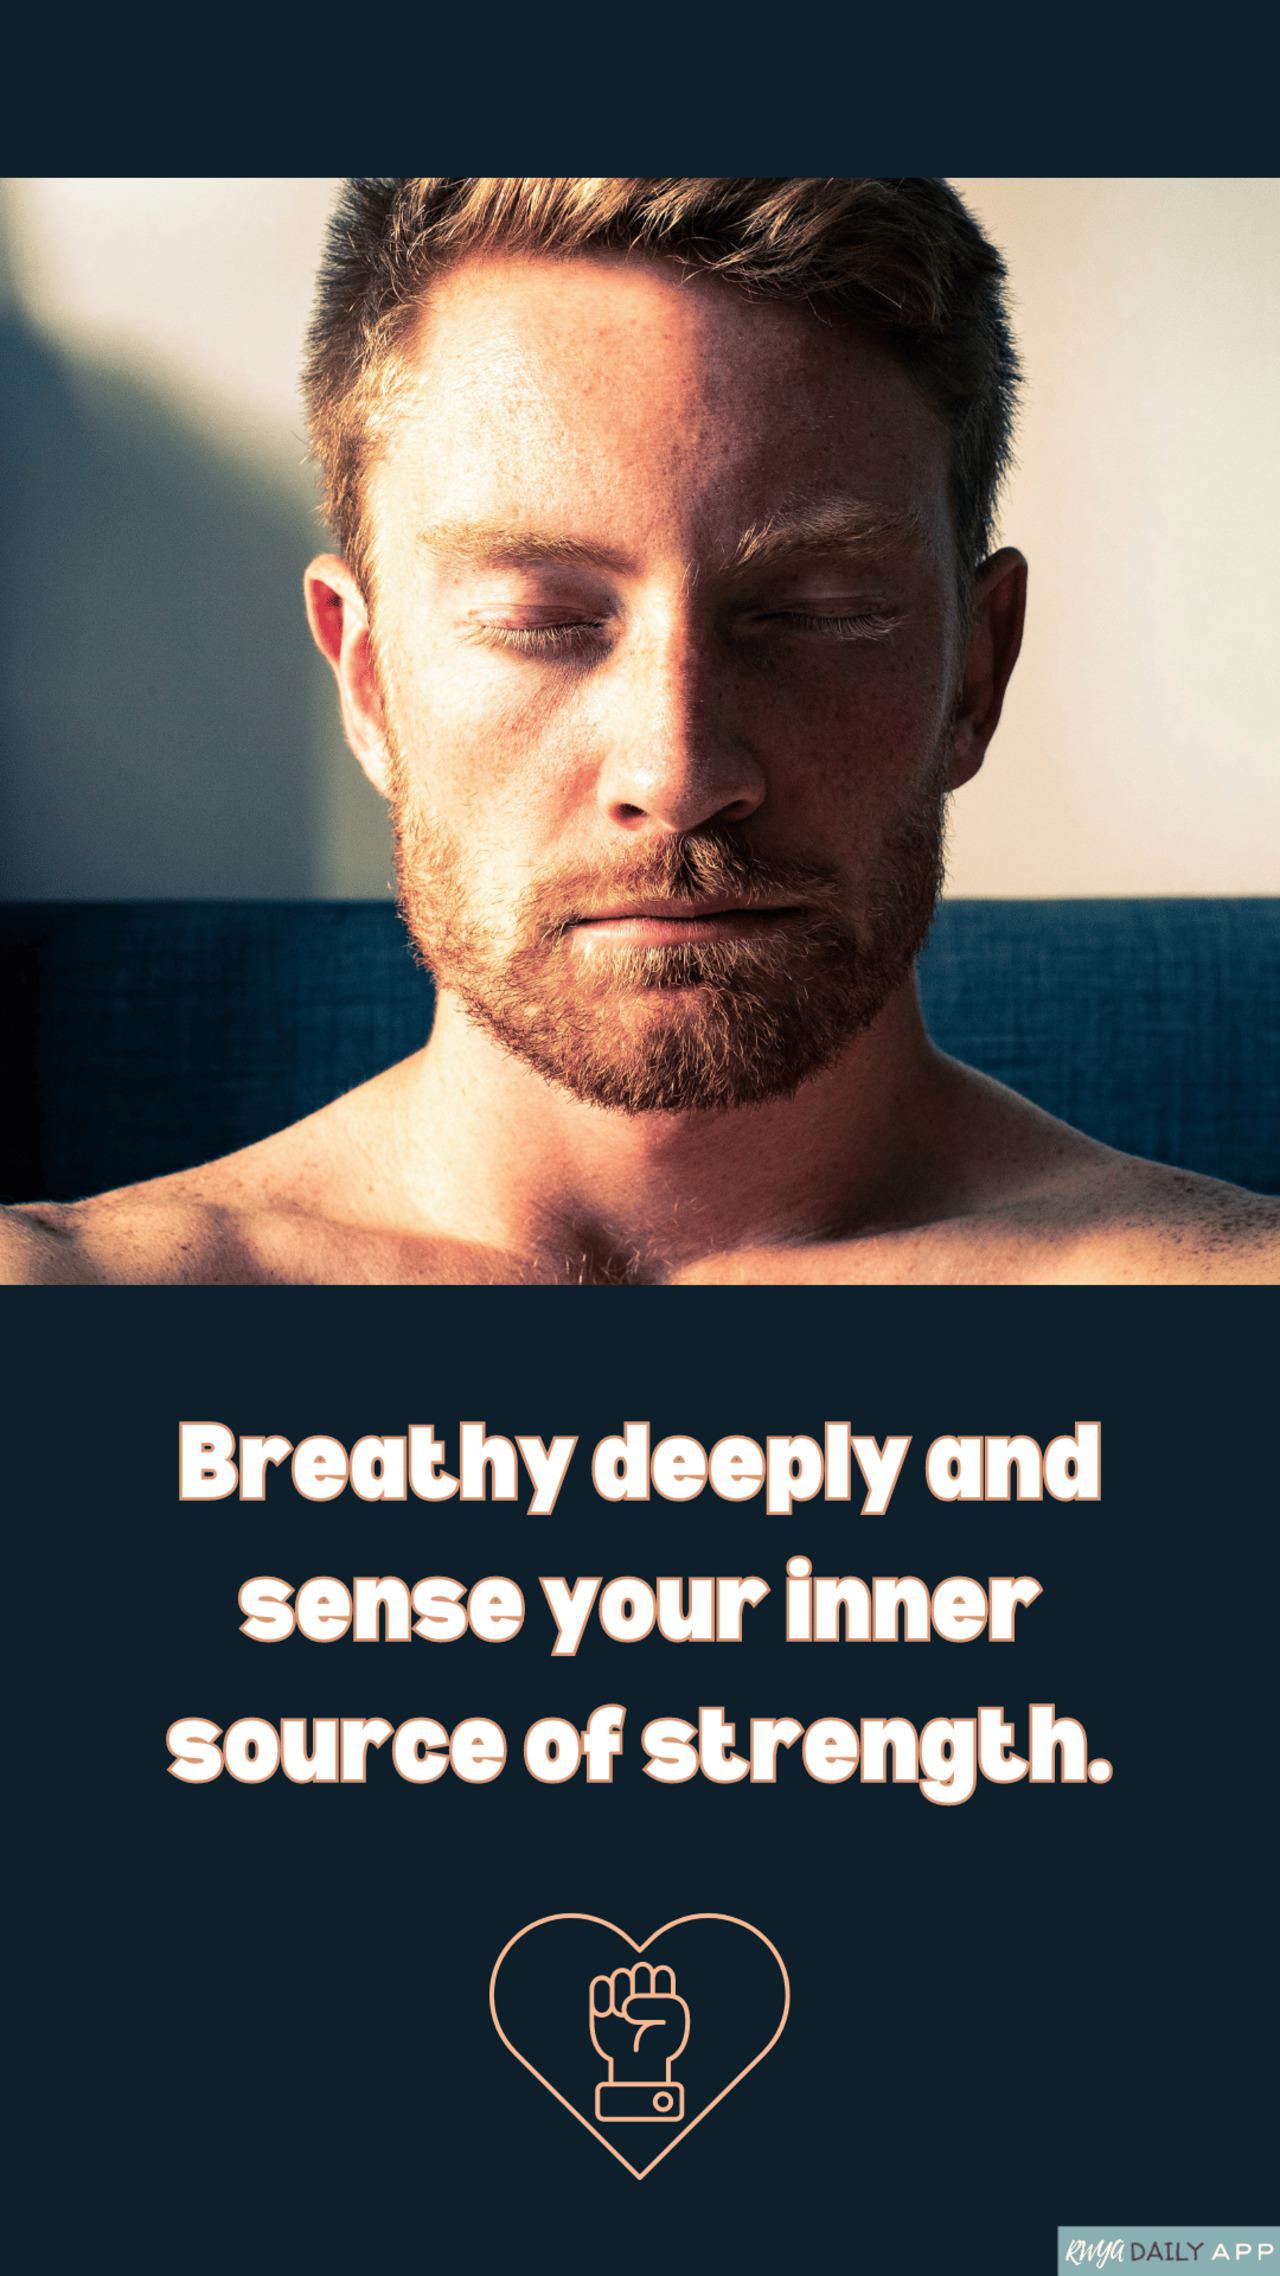 Breathe deeply and sense your inner source of strength.